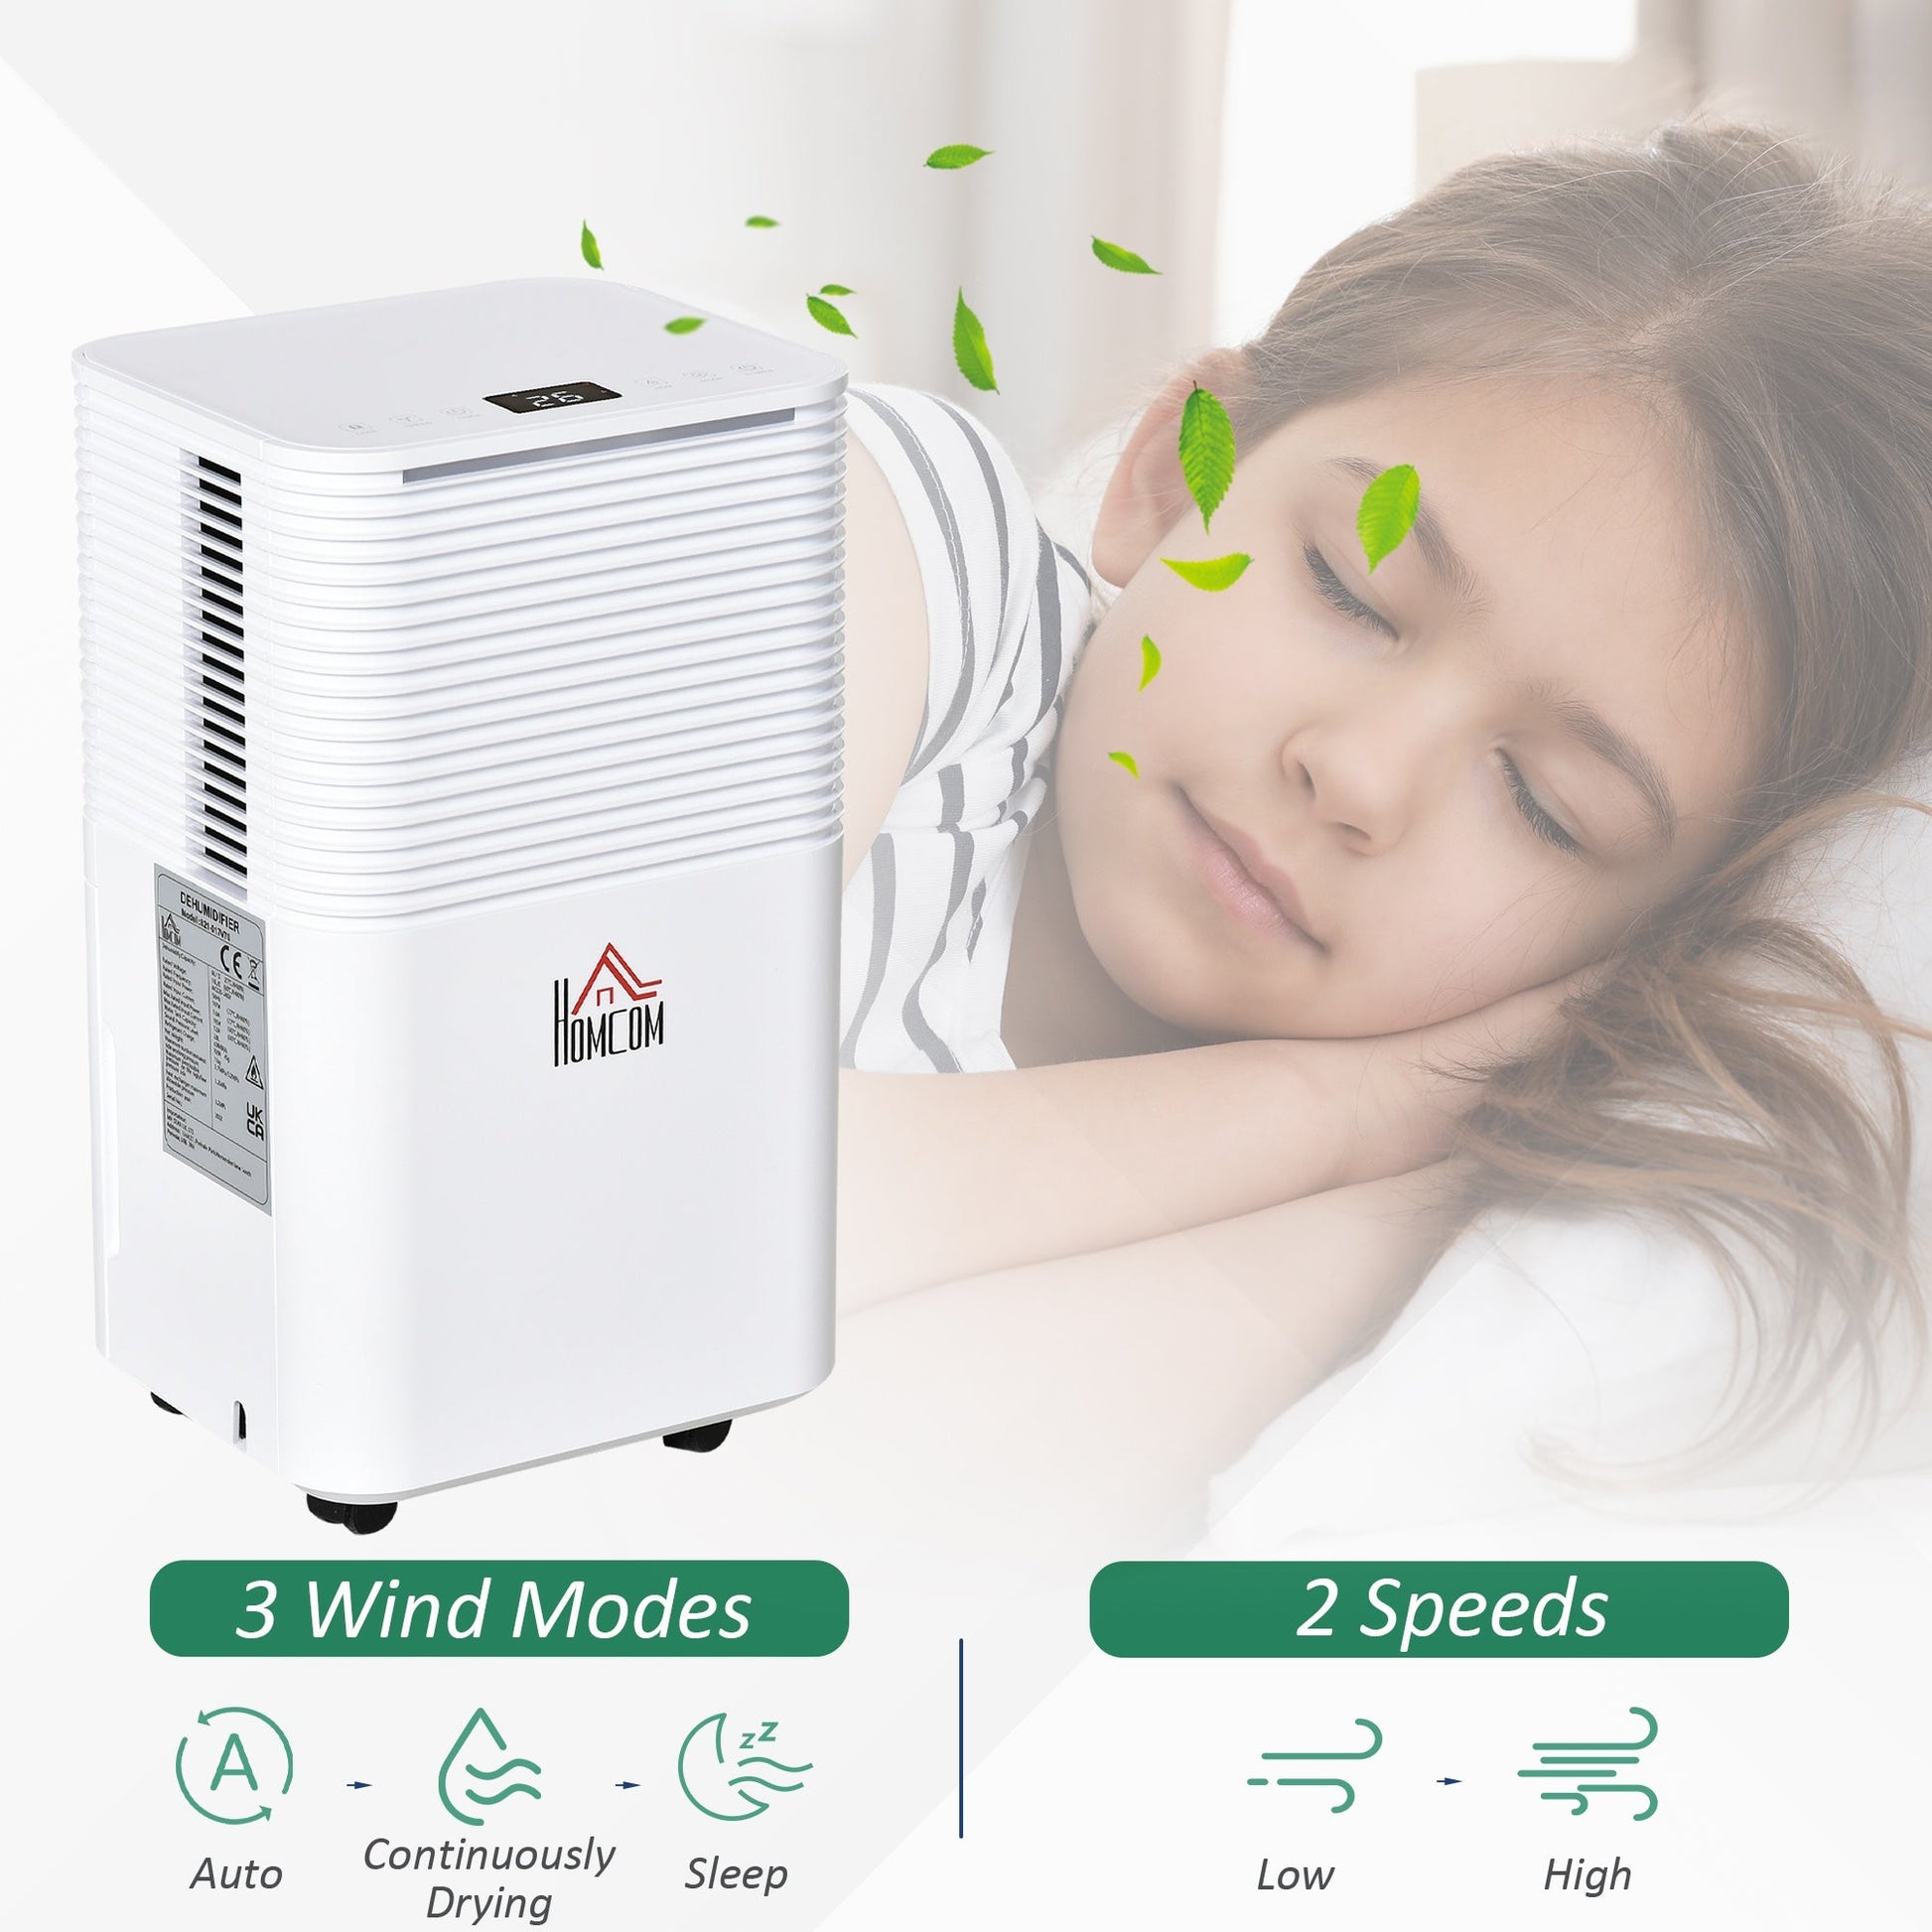 1260 sq.Ft Portable Quiet Dehumidifier for Home Laundry Room Bedroom Basement, 21pt Electric Moisture Air De-Humidifier with 3 Modes Home Dehumidifiers   at Gallery Canada